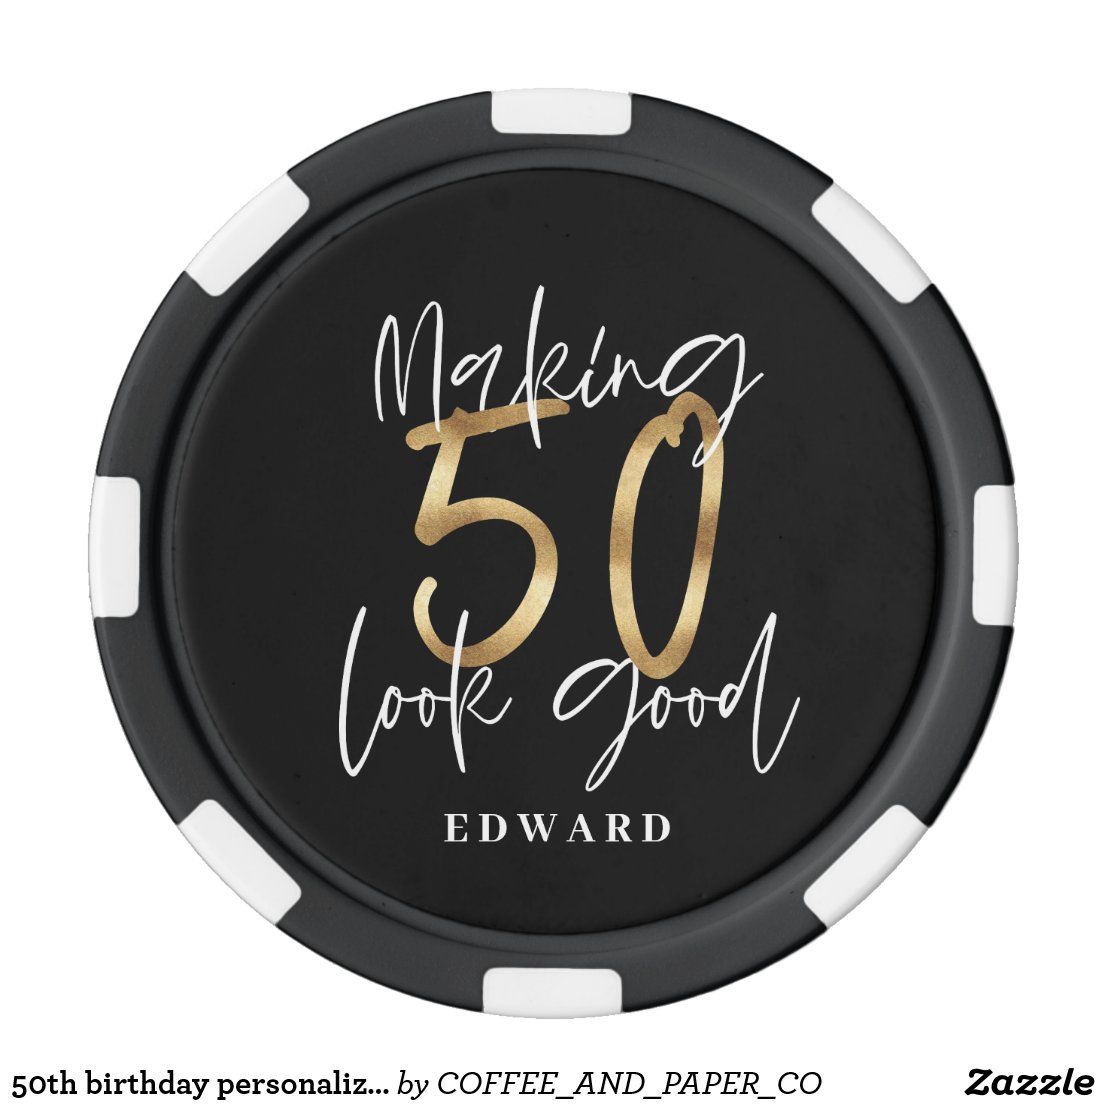 50th birthday personalized favor gift black gold poker chips